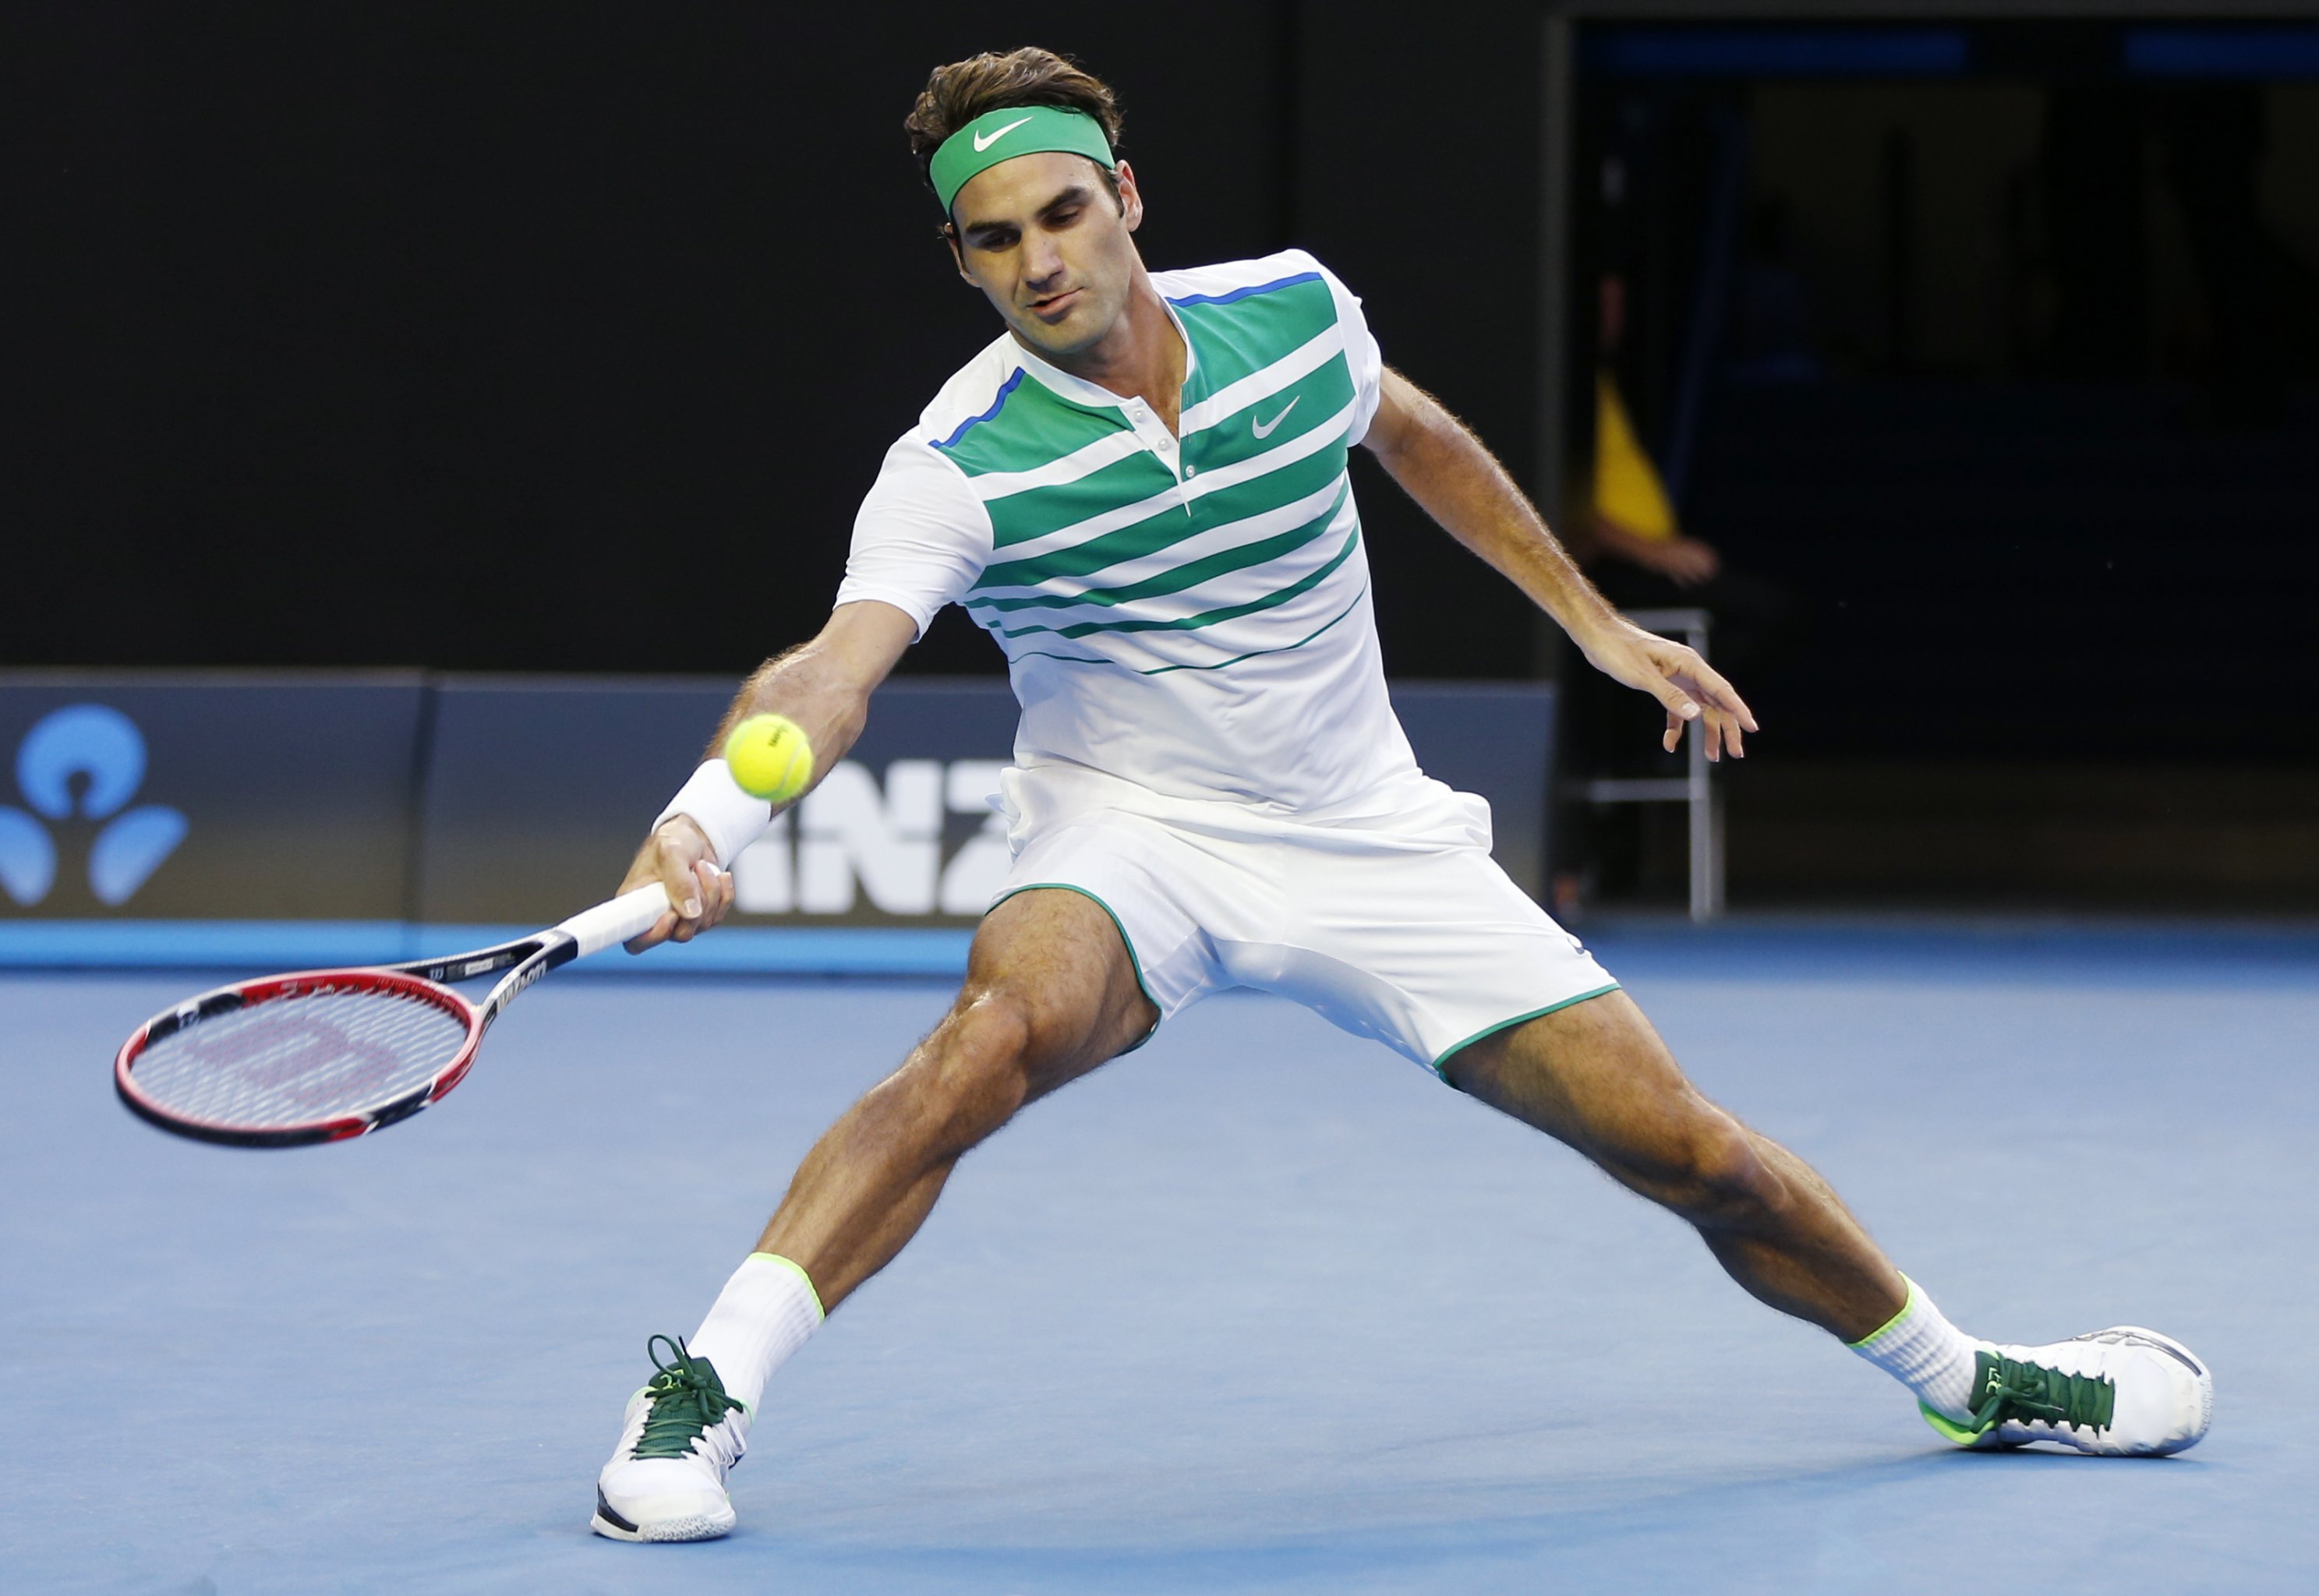 Australian Open: Best and Worst Dressed in | Bleacher Report | Latest Videos and Highlights